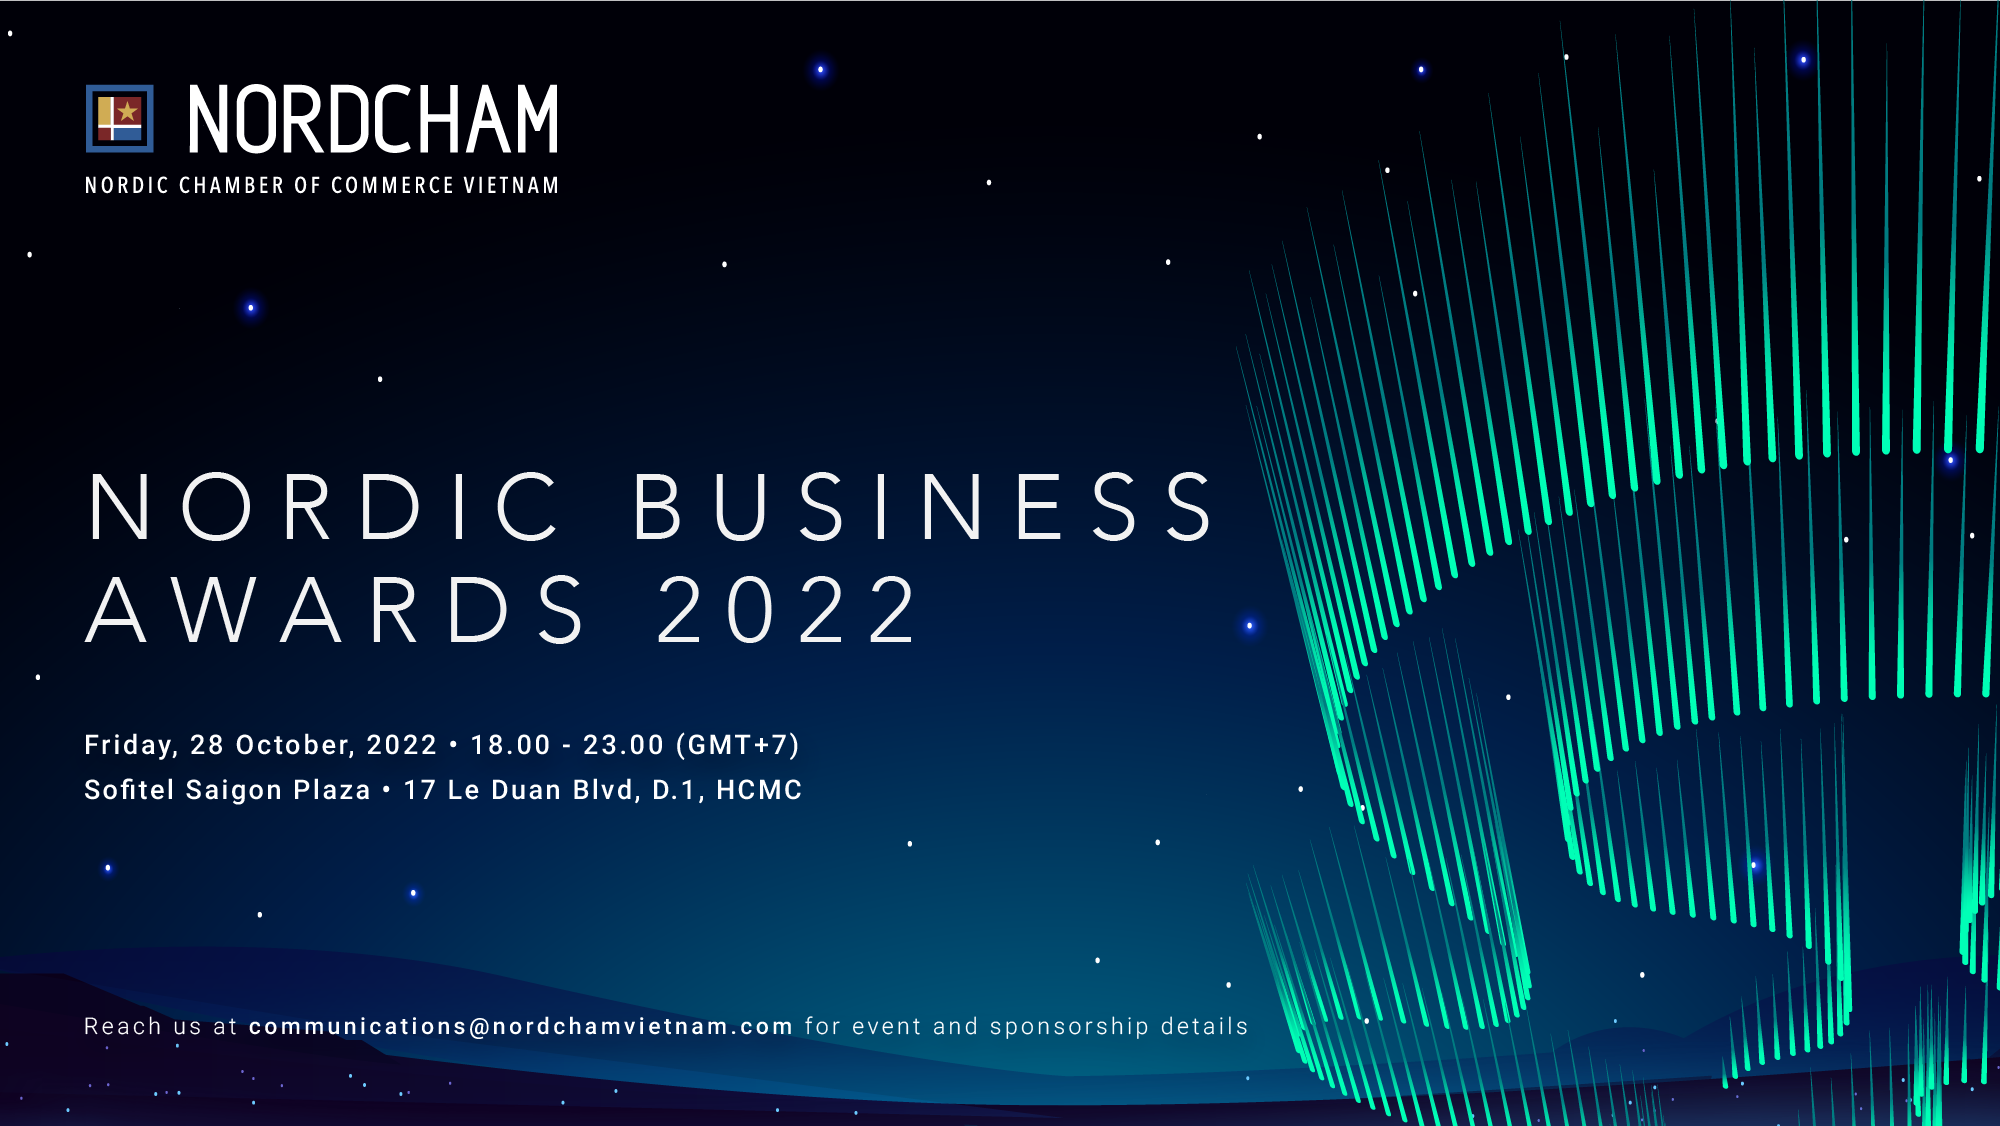 NORDIC BUSINESS AWARDS 2022